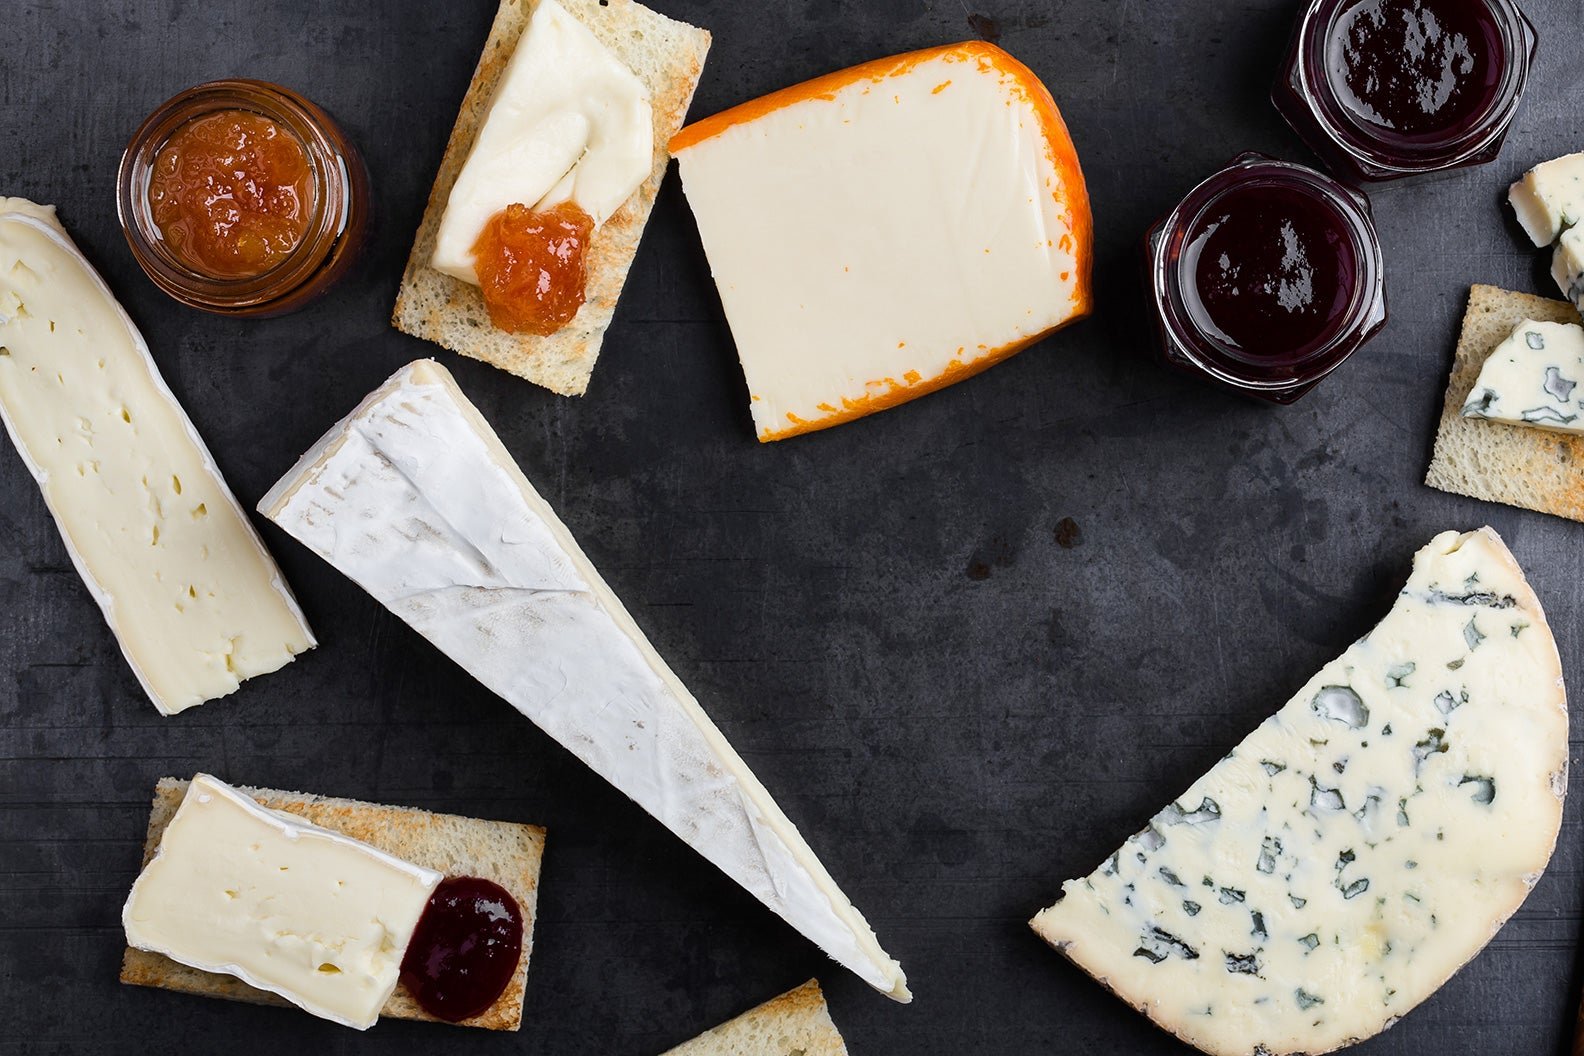 A Michelin-Star Chef Calls These Cheese and Charcuterie Pairings “Soul Mates”